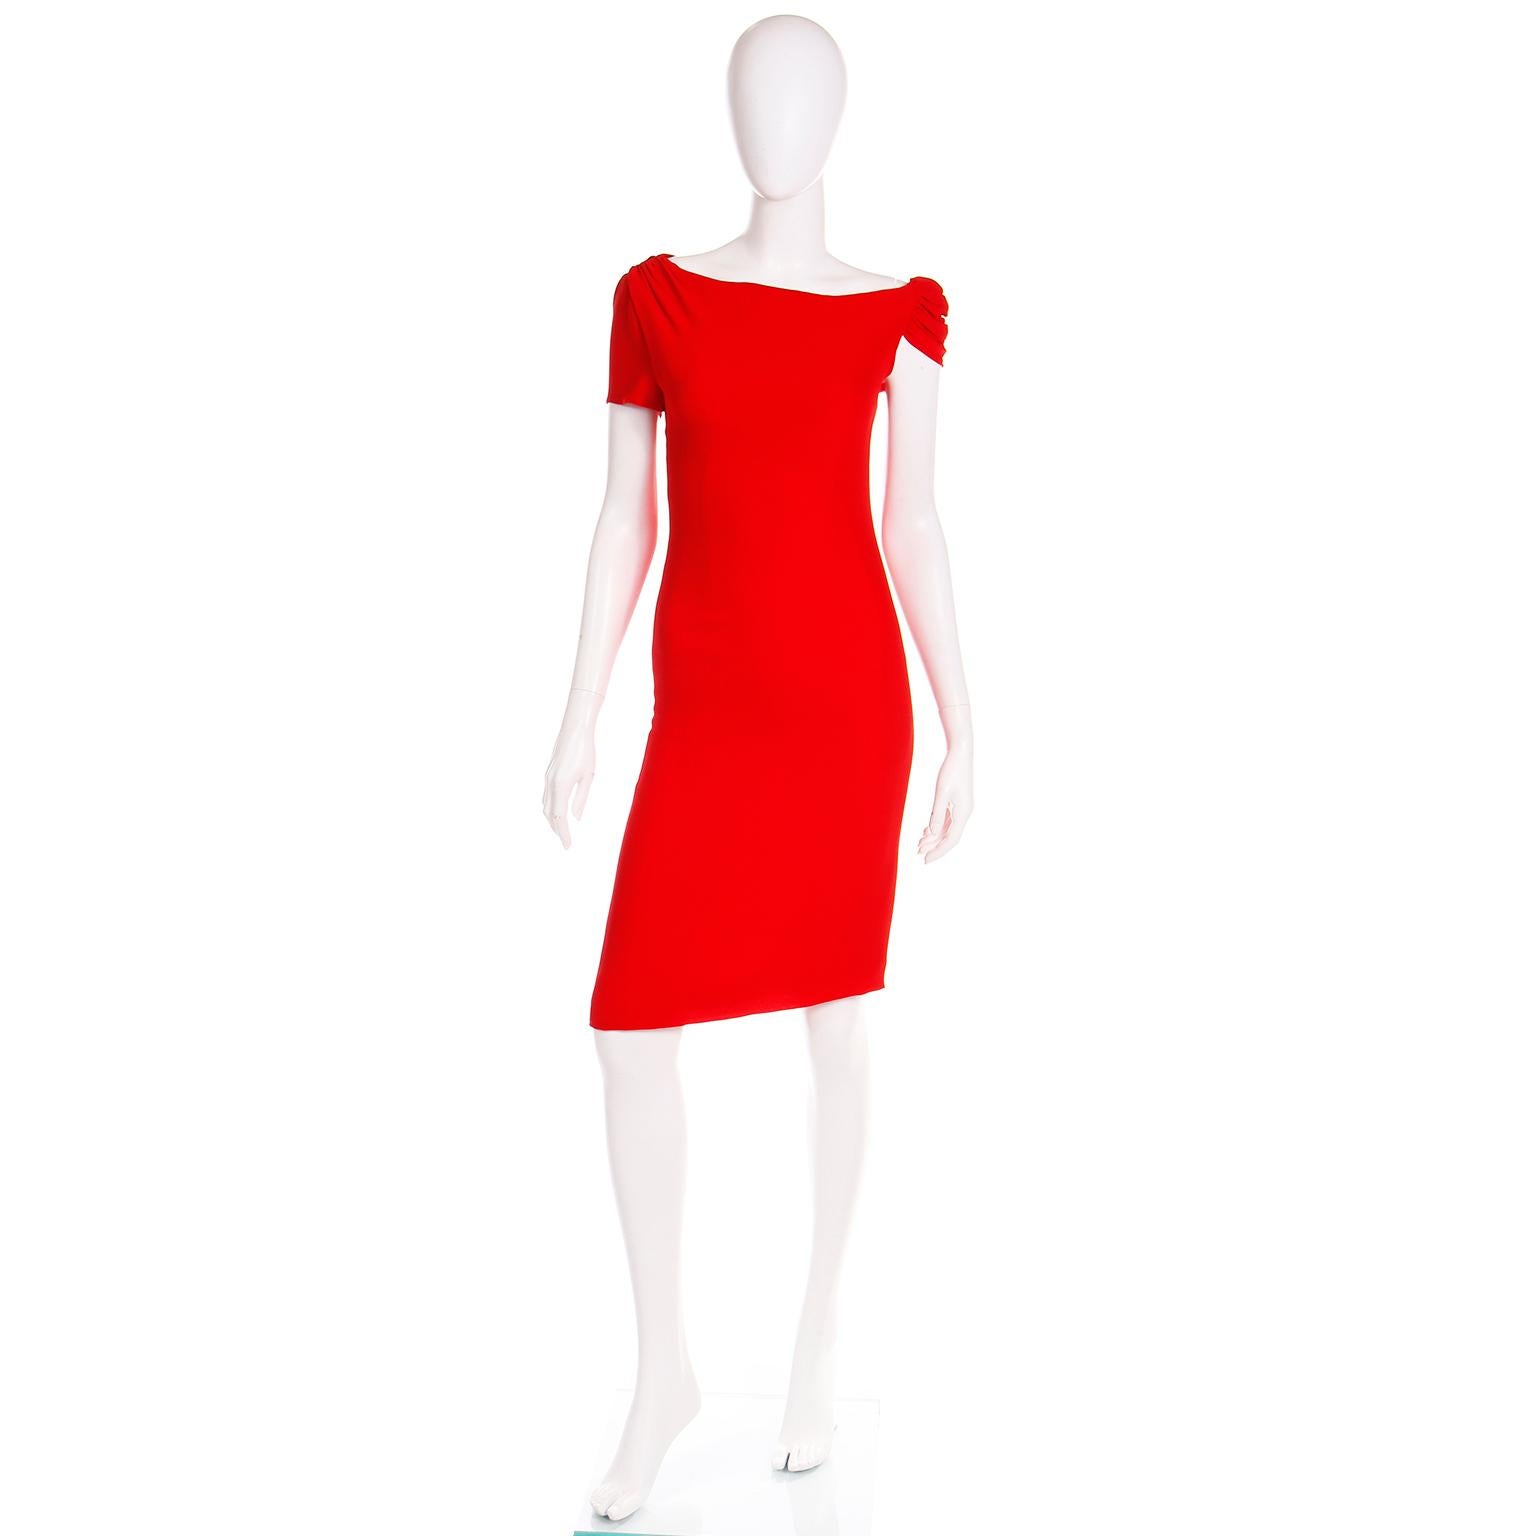 We always love vintage Valentino Garavani pieces and this beautiful day or evening sheath dress is in the iconic Valentino red. This is a very flattering shade of red and it is Valentino's signature hue.

This red silk crepe sheath dress is fully